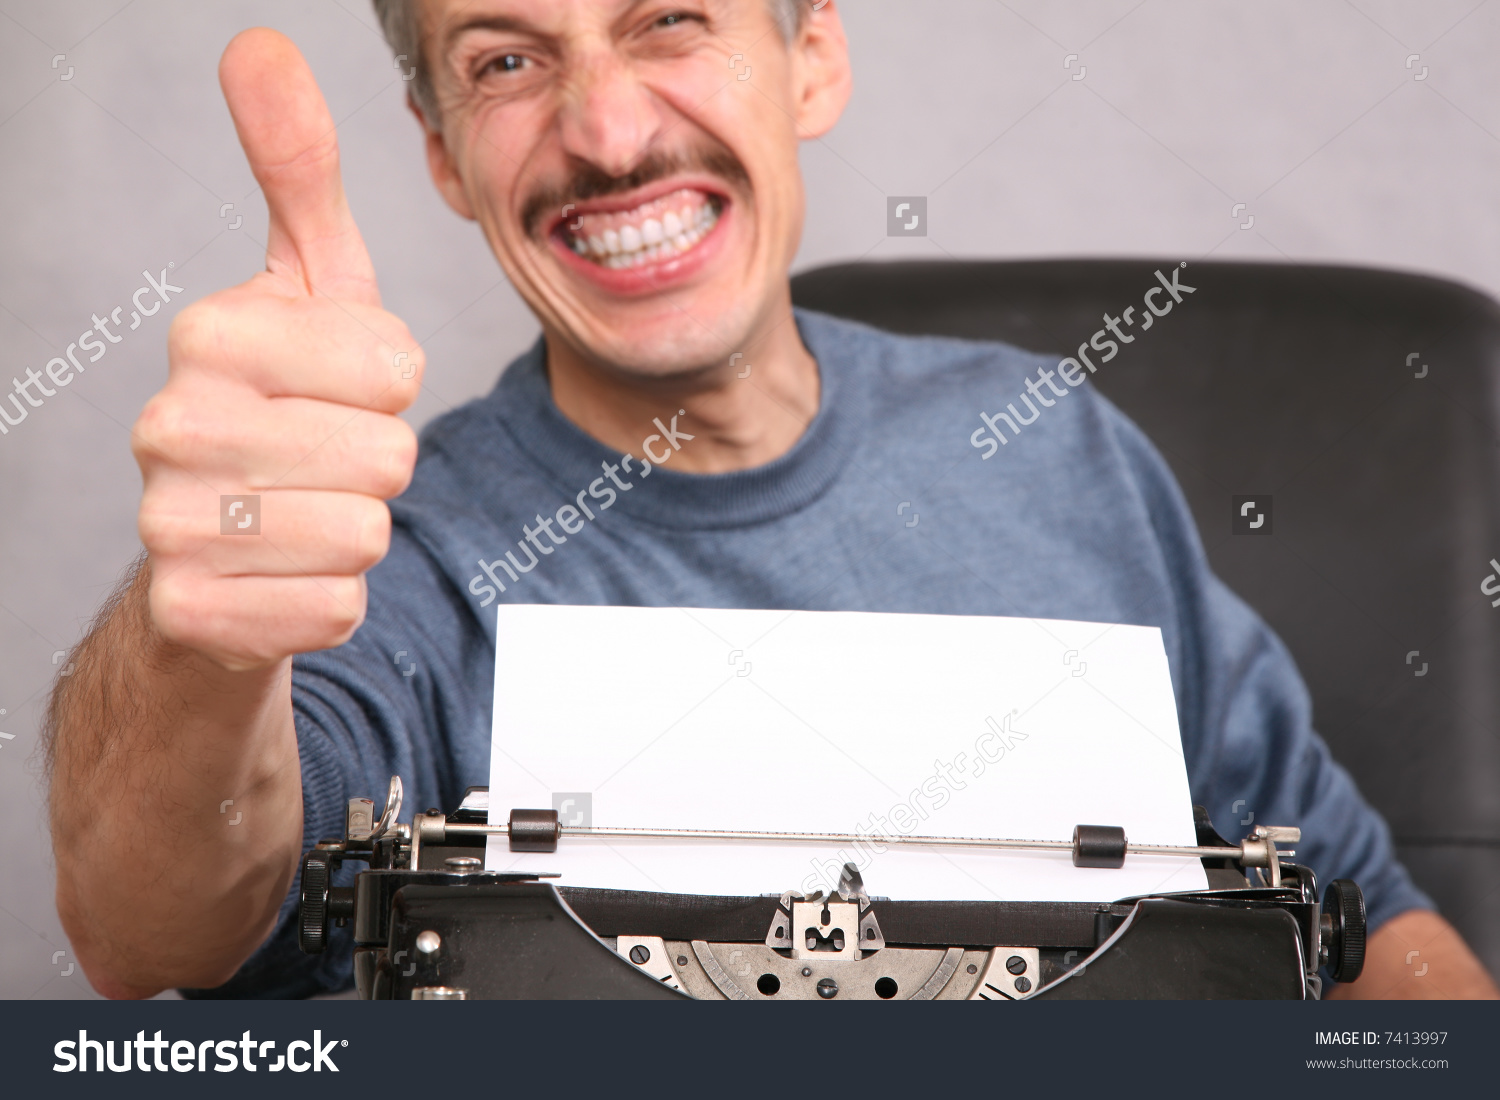 stock-photo-man-after-the-typewriter-shows-gesture-by-the-finger-7413997